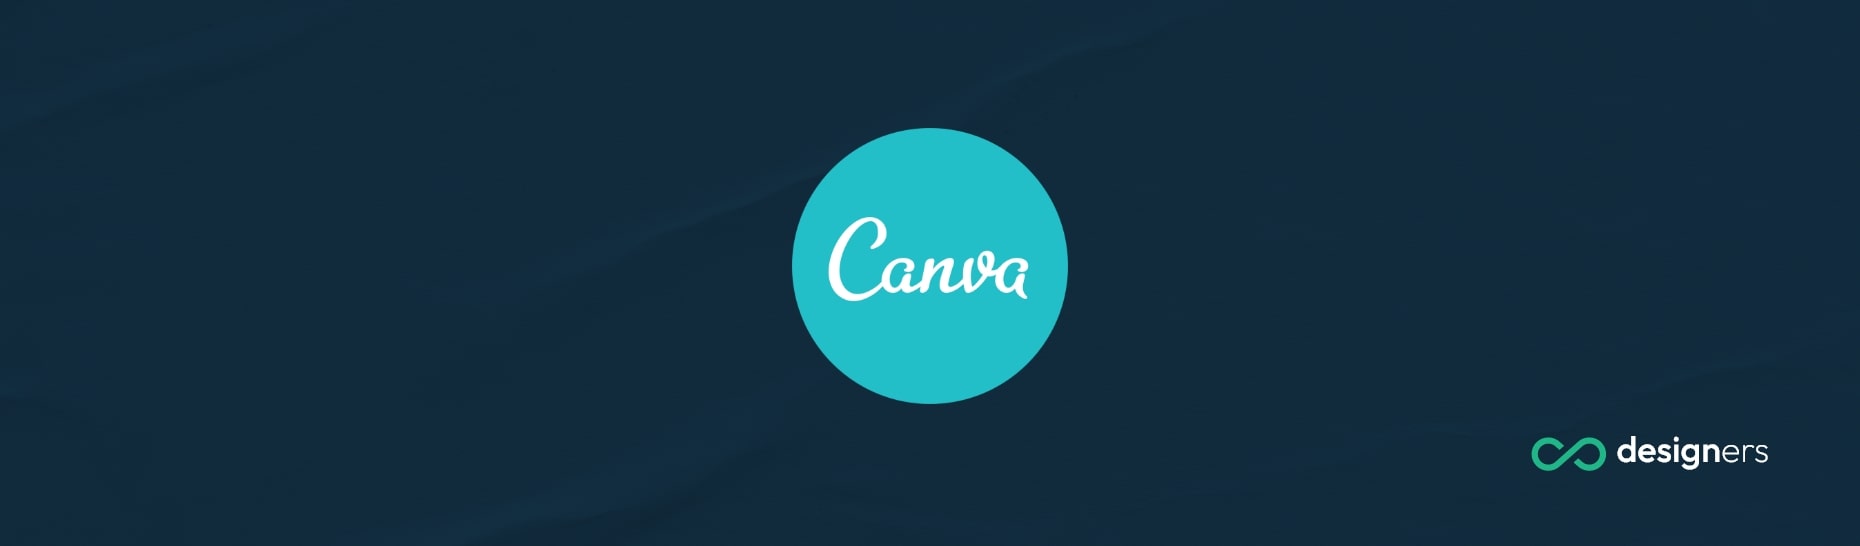 What Are Canva Graphics?